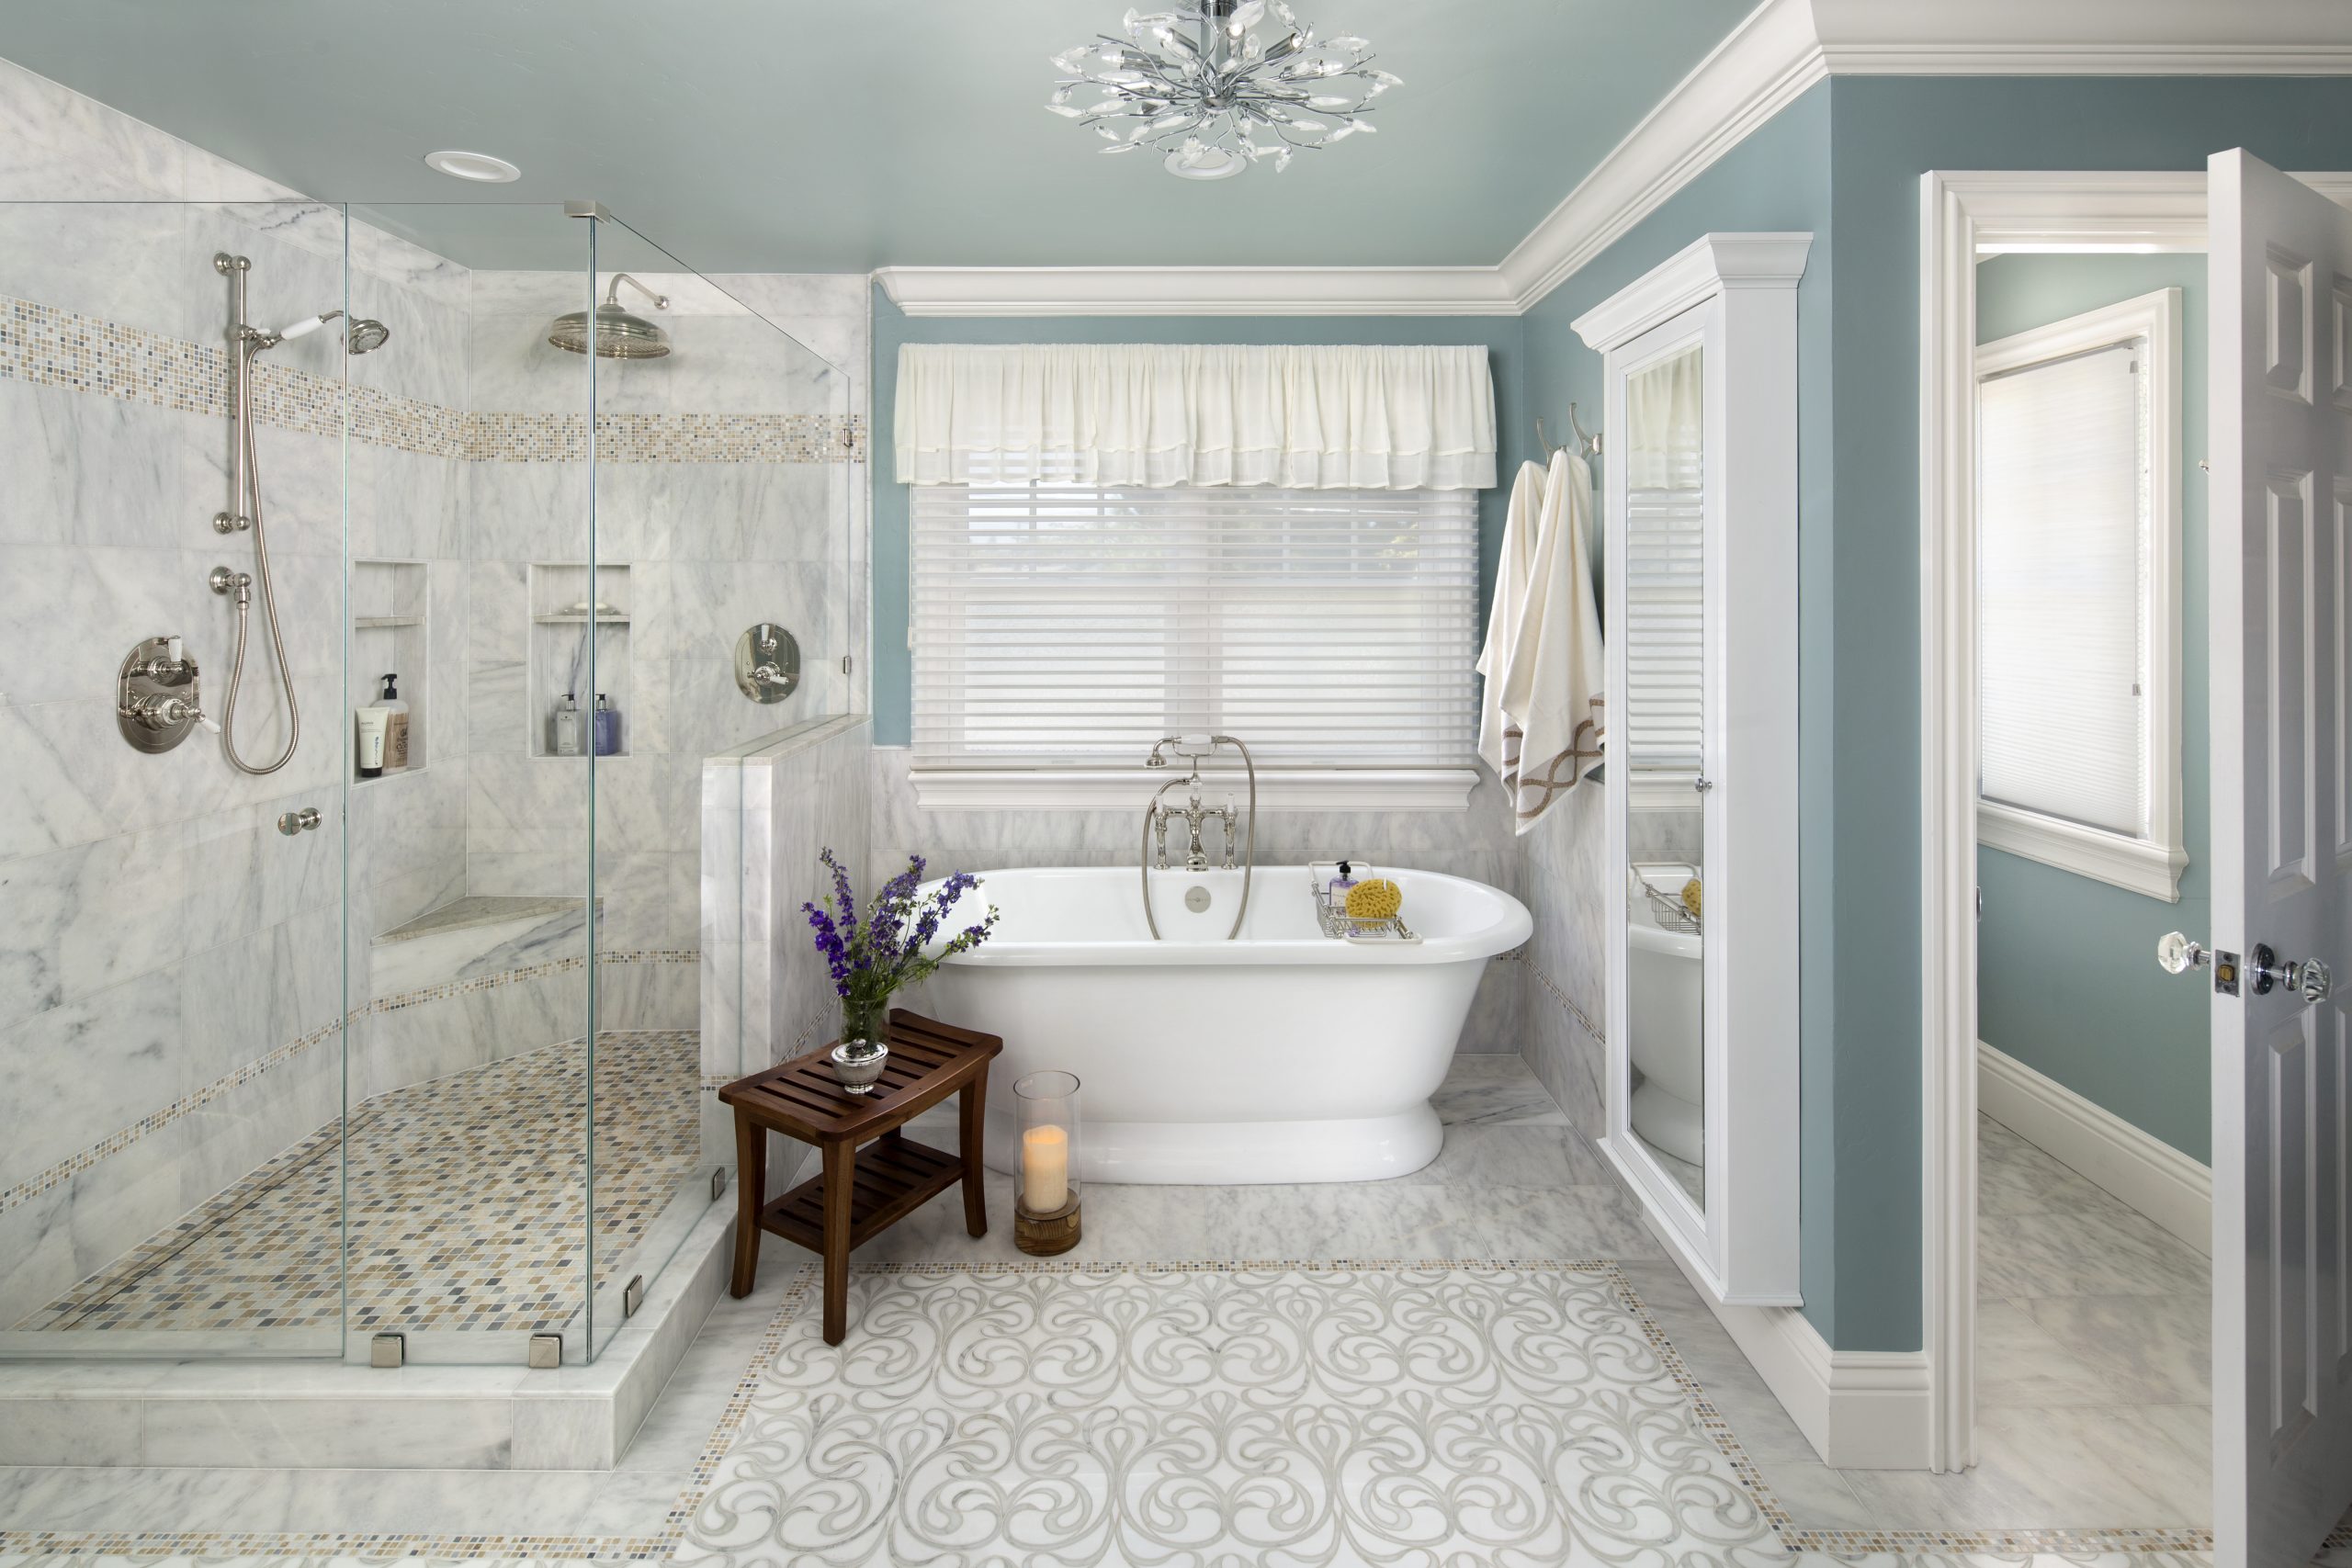 A traditional style bathroom with porcelain tub and glass shower.